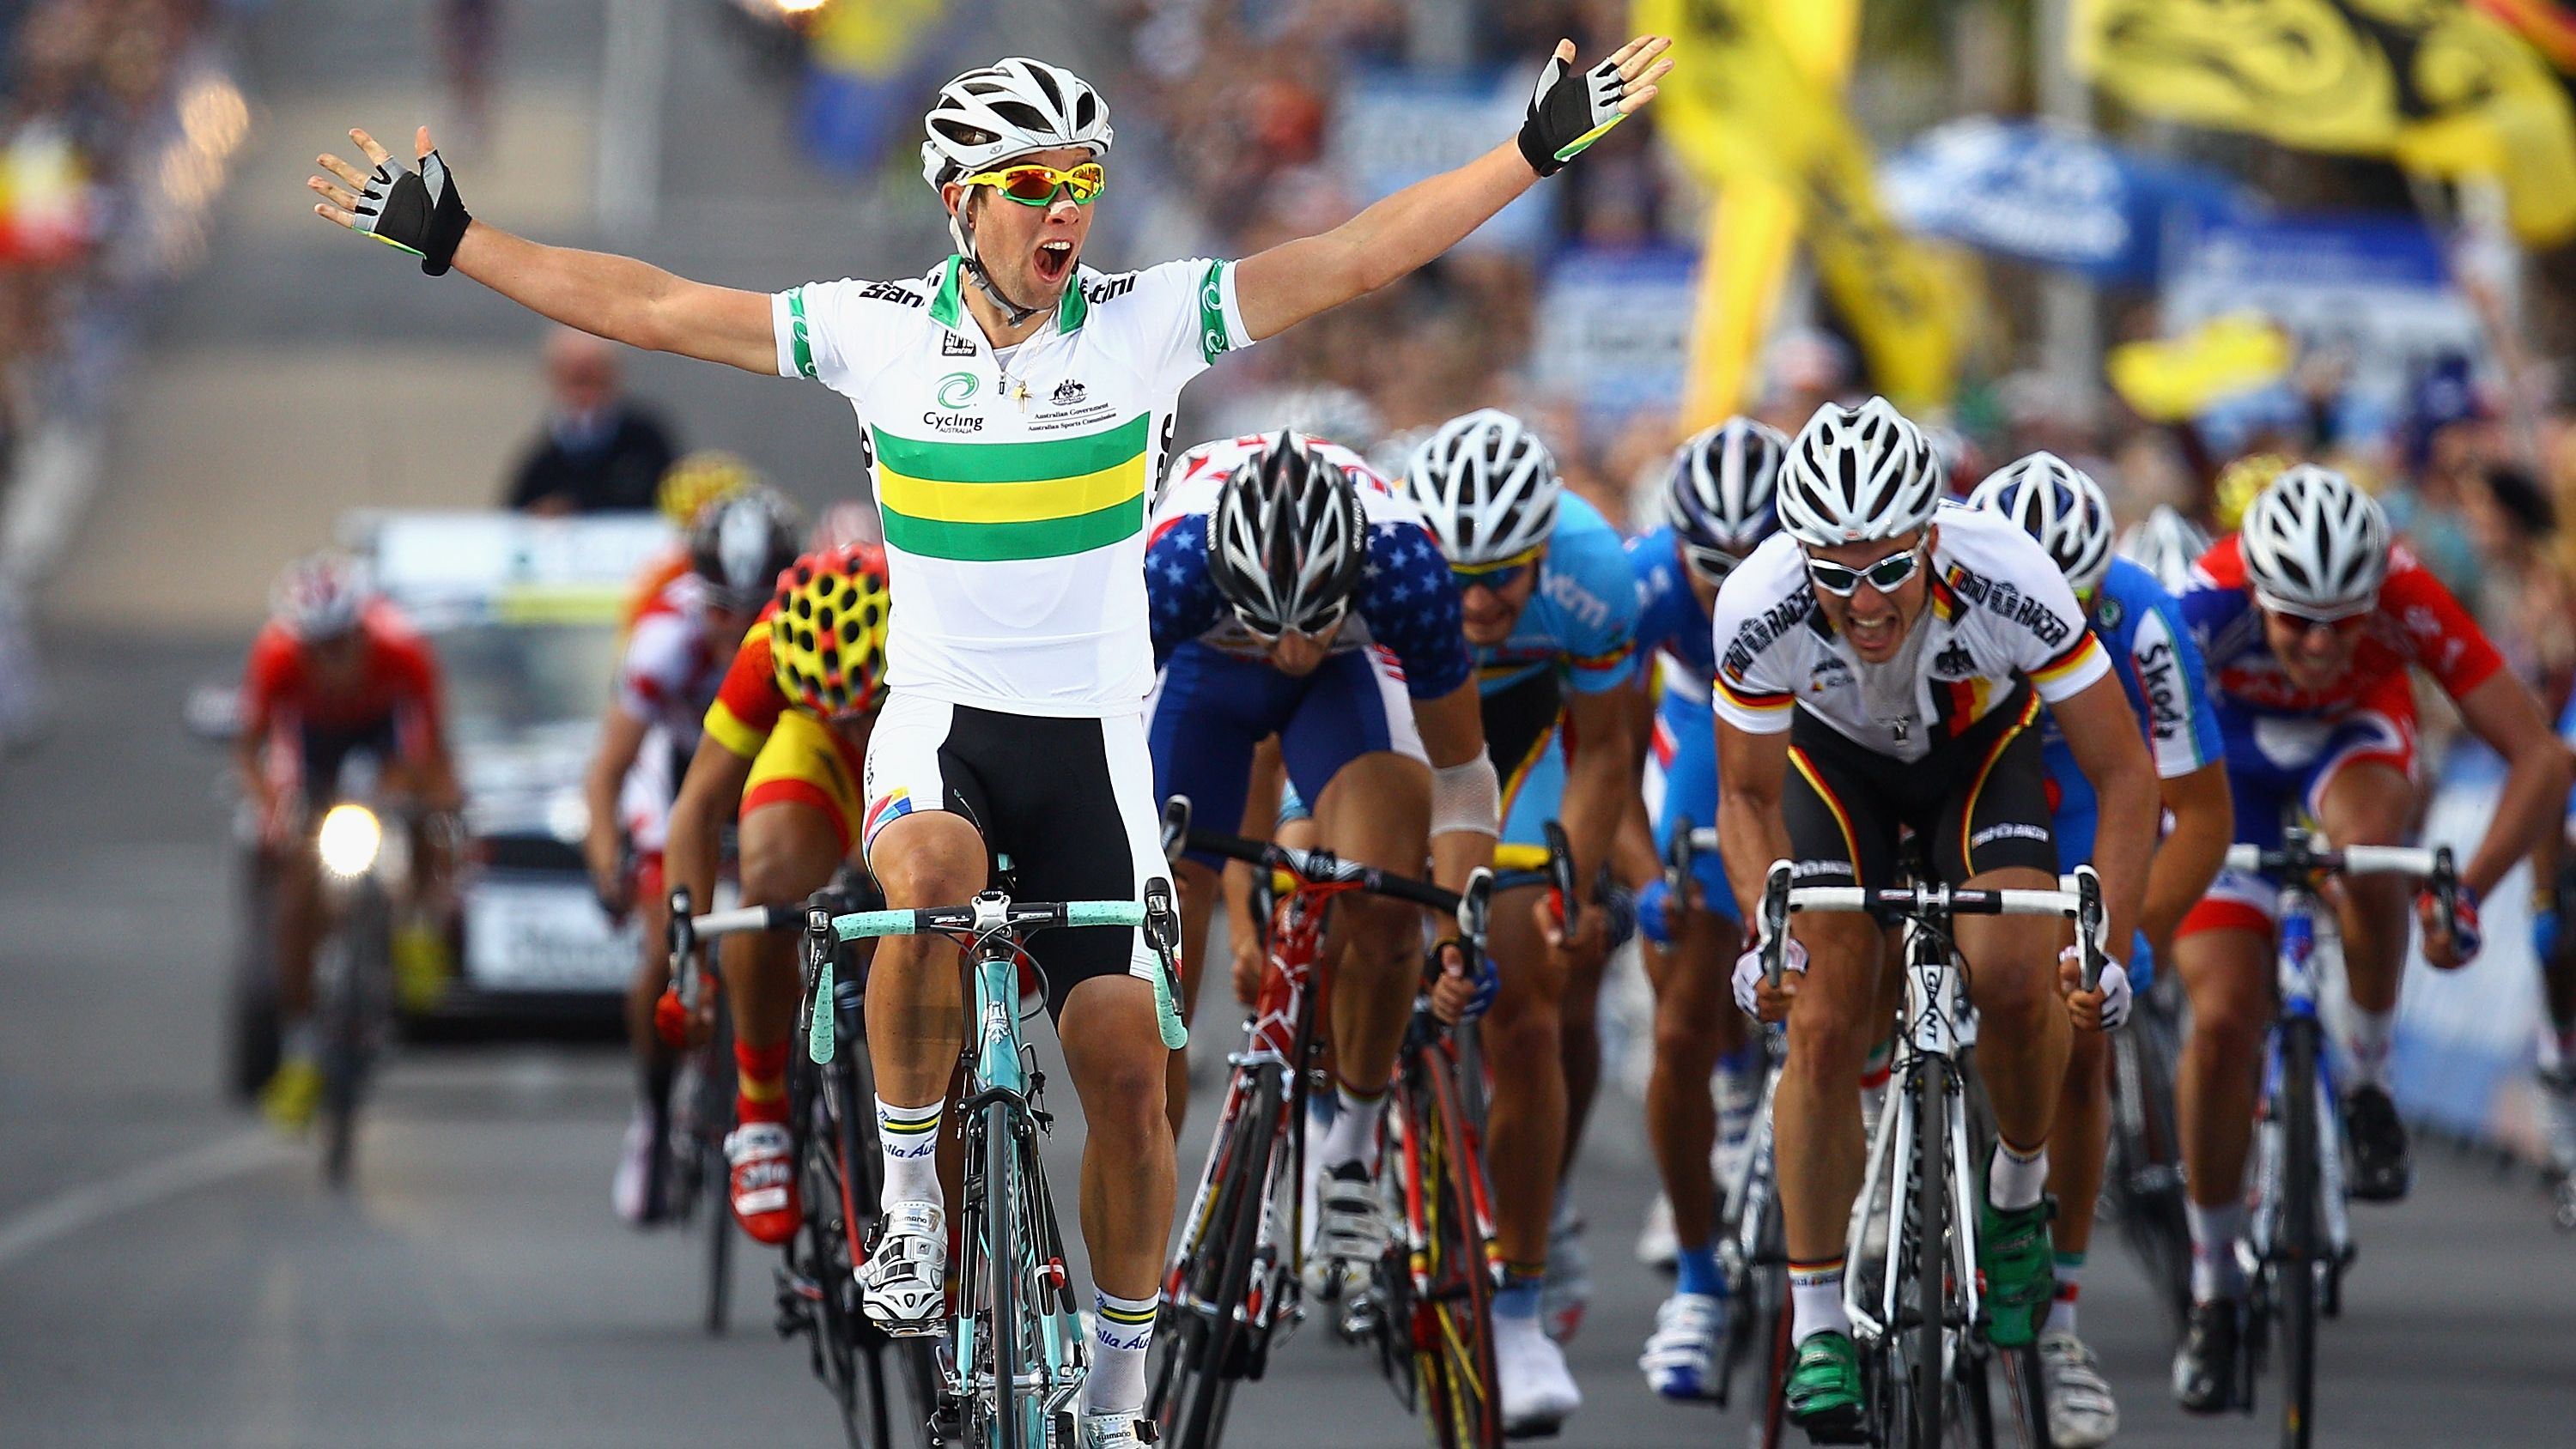 Michael Matthews of Australia celebrates winning the under-23 road race at the 2010 UCI Road World Championships in Geelong.